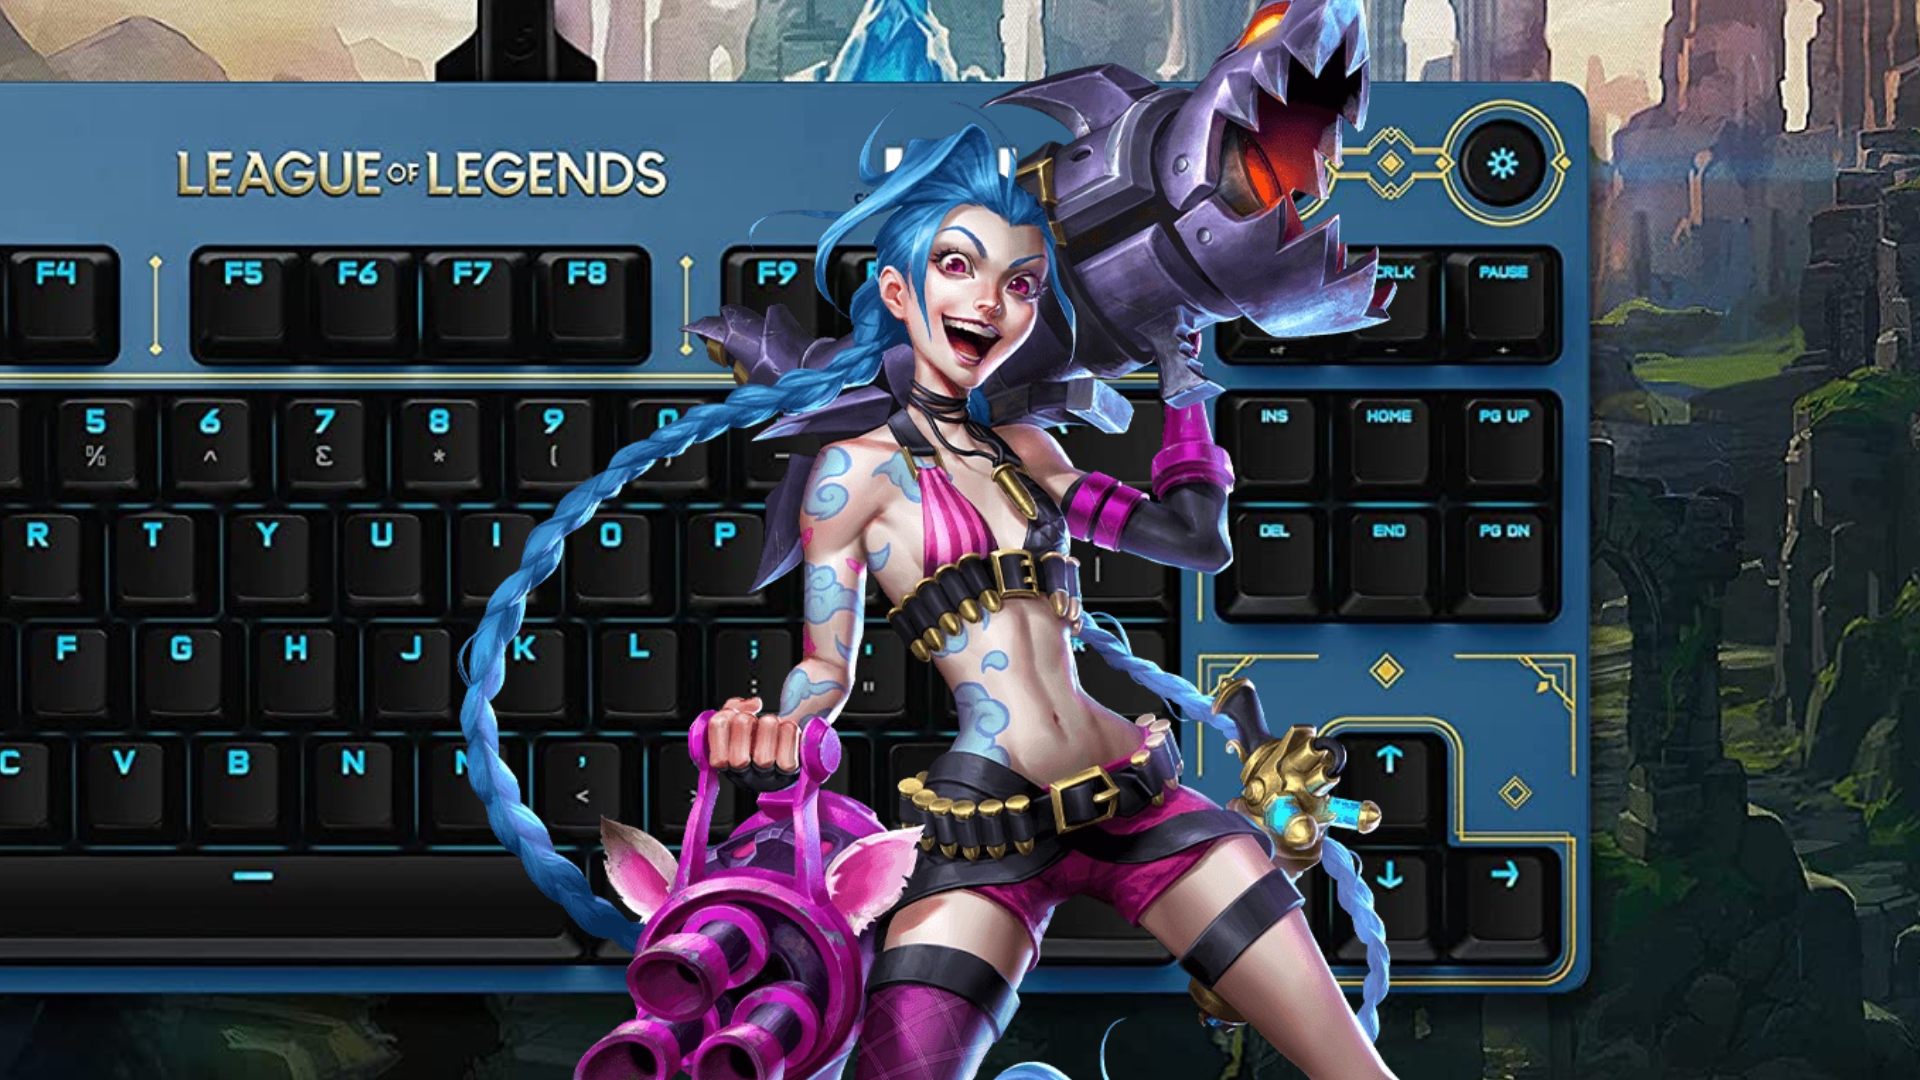 Grab over 50% off this Logitech League of Legends keyboard